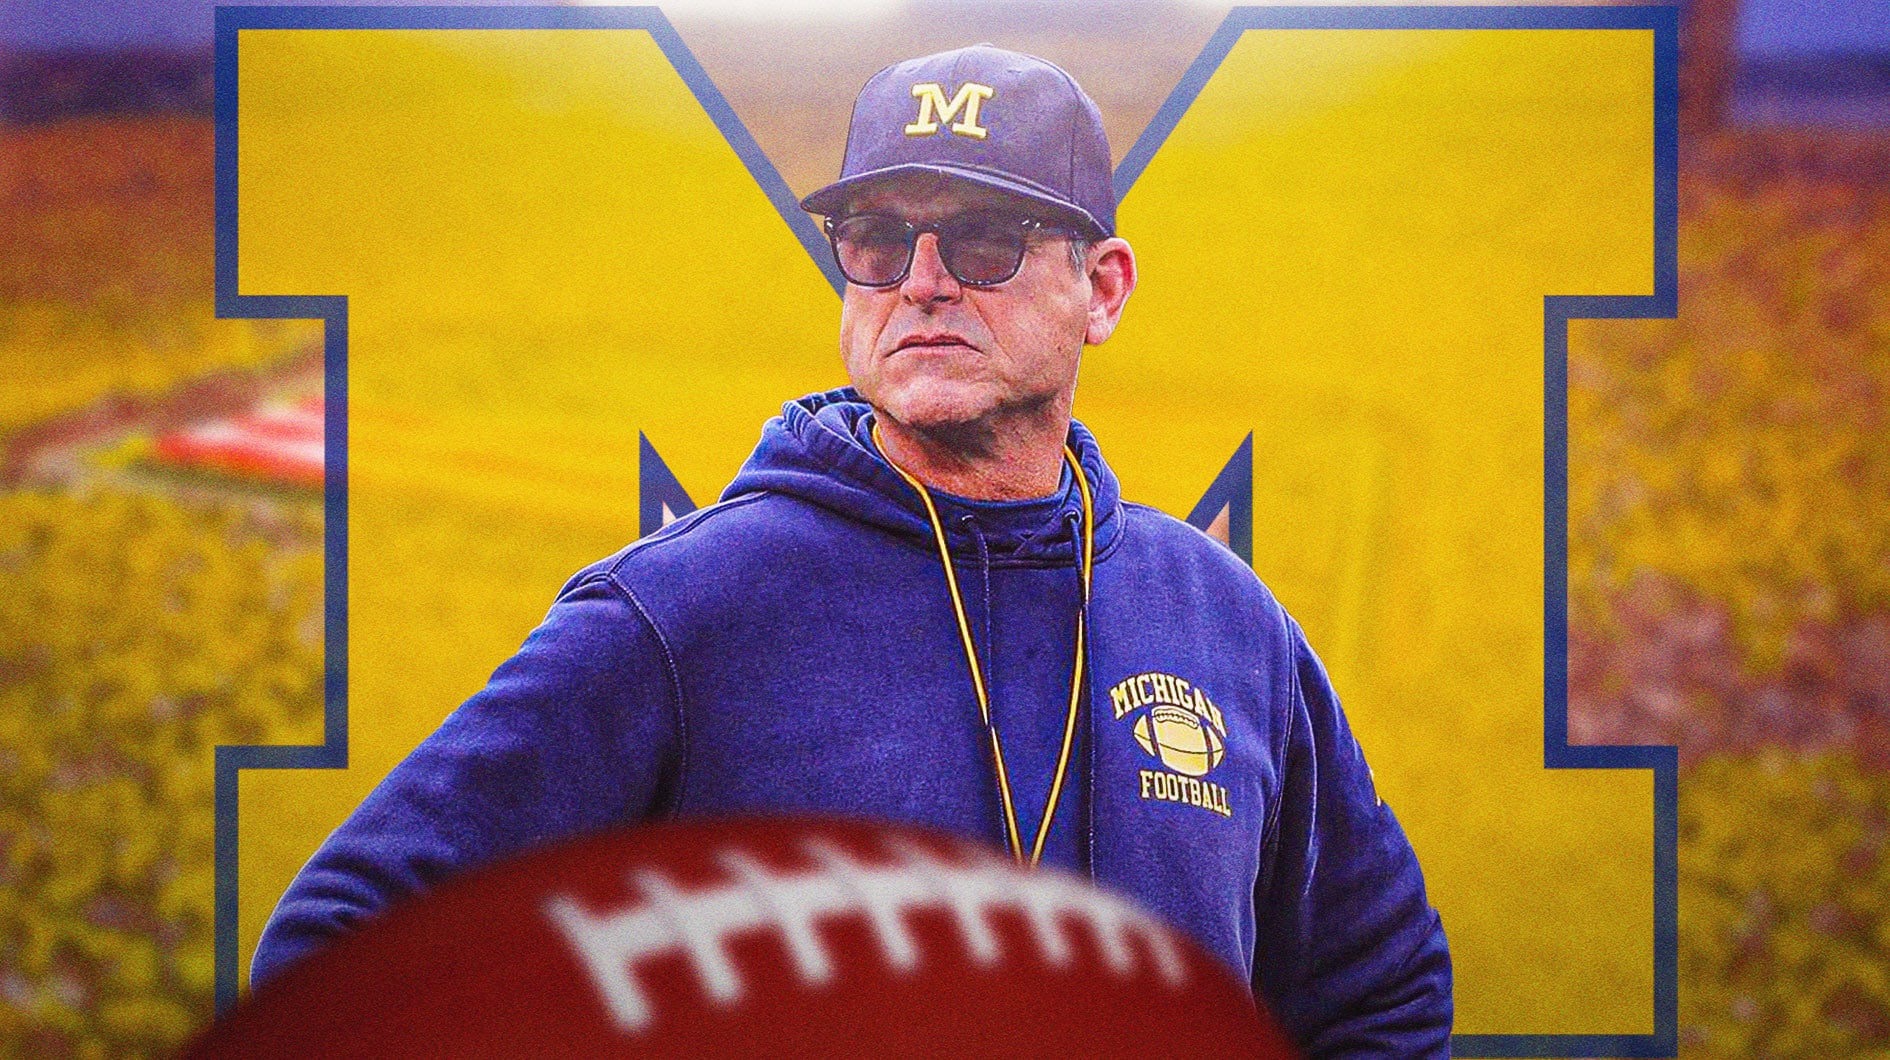 Michigan football, Wolverines, Tom Mars, Jim Harbaugh, Big Ten, Jim Harbaugh with Michigan football stadium in the background